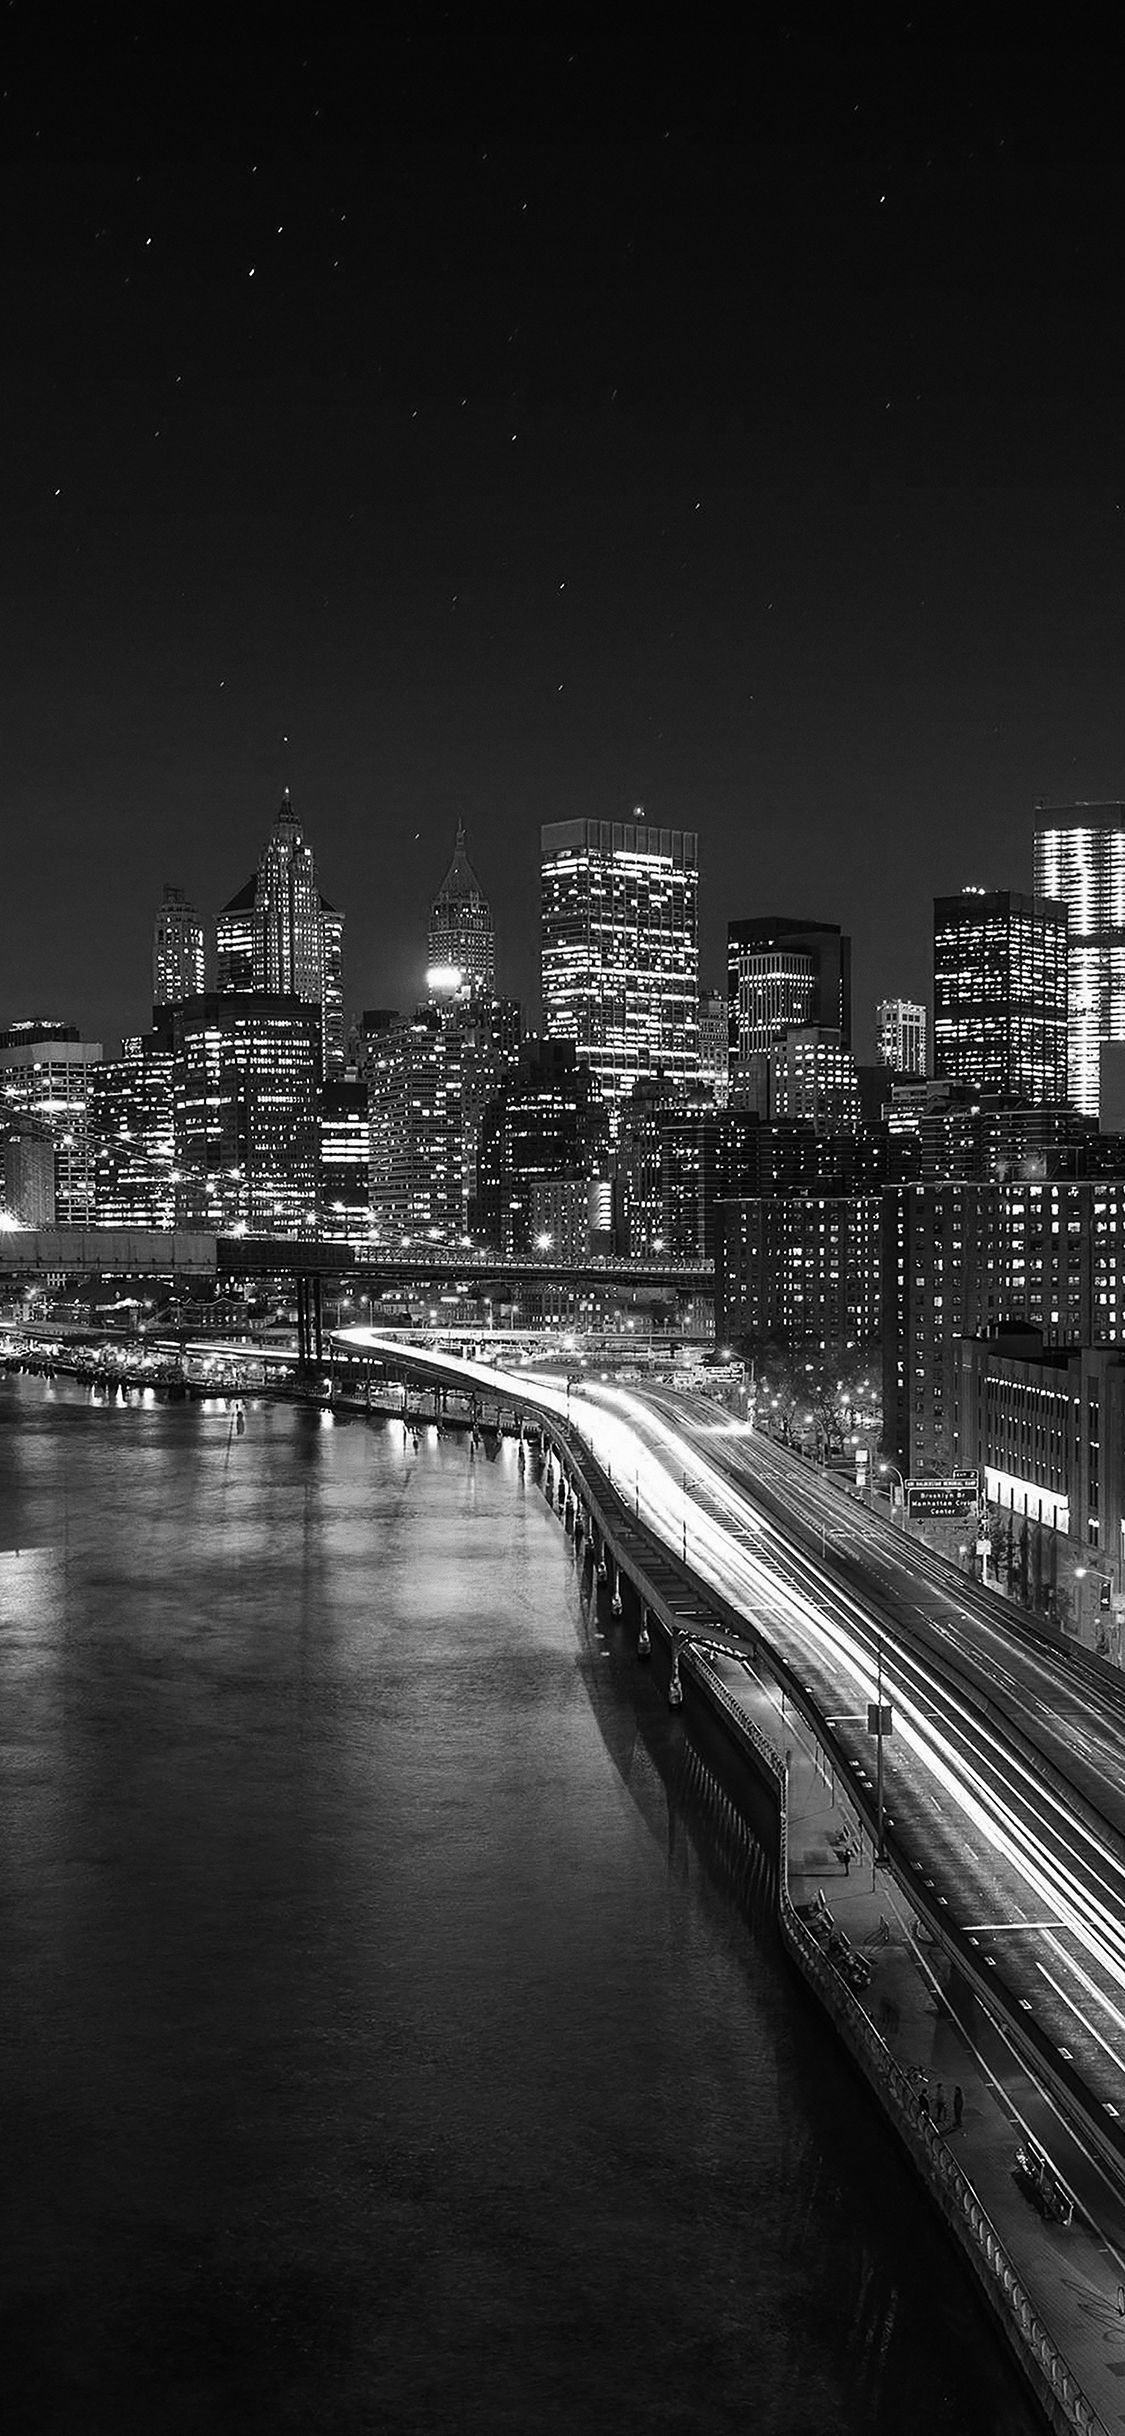 A black and white photo of the city - City